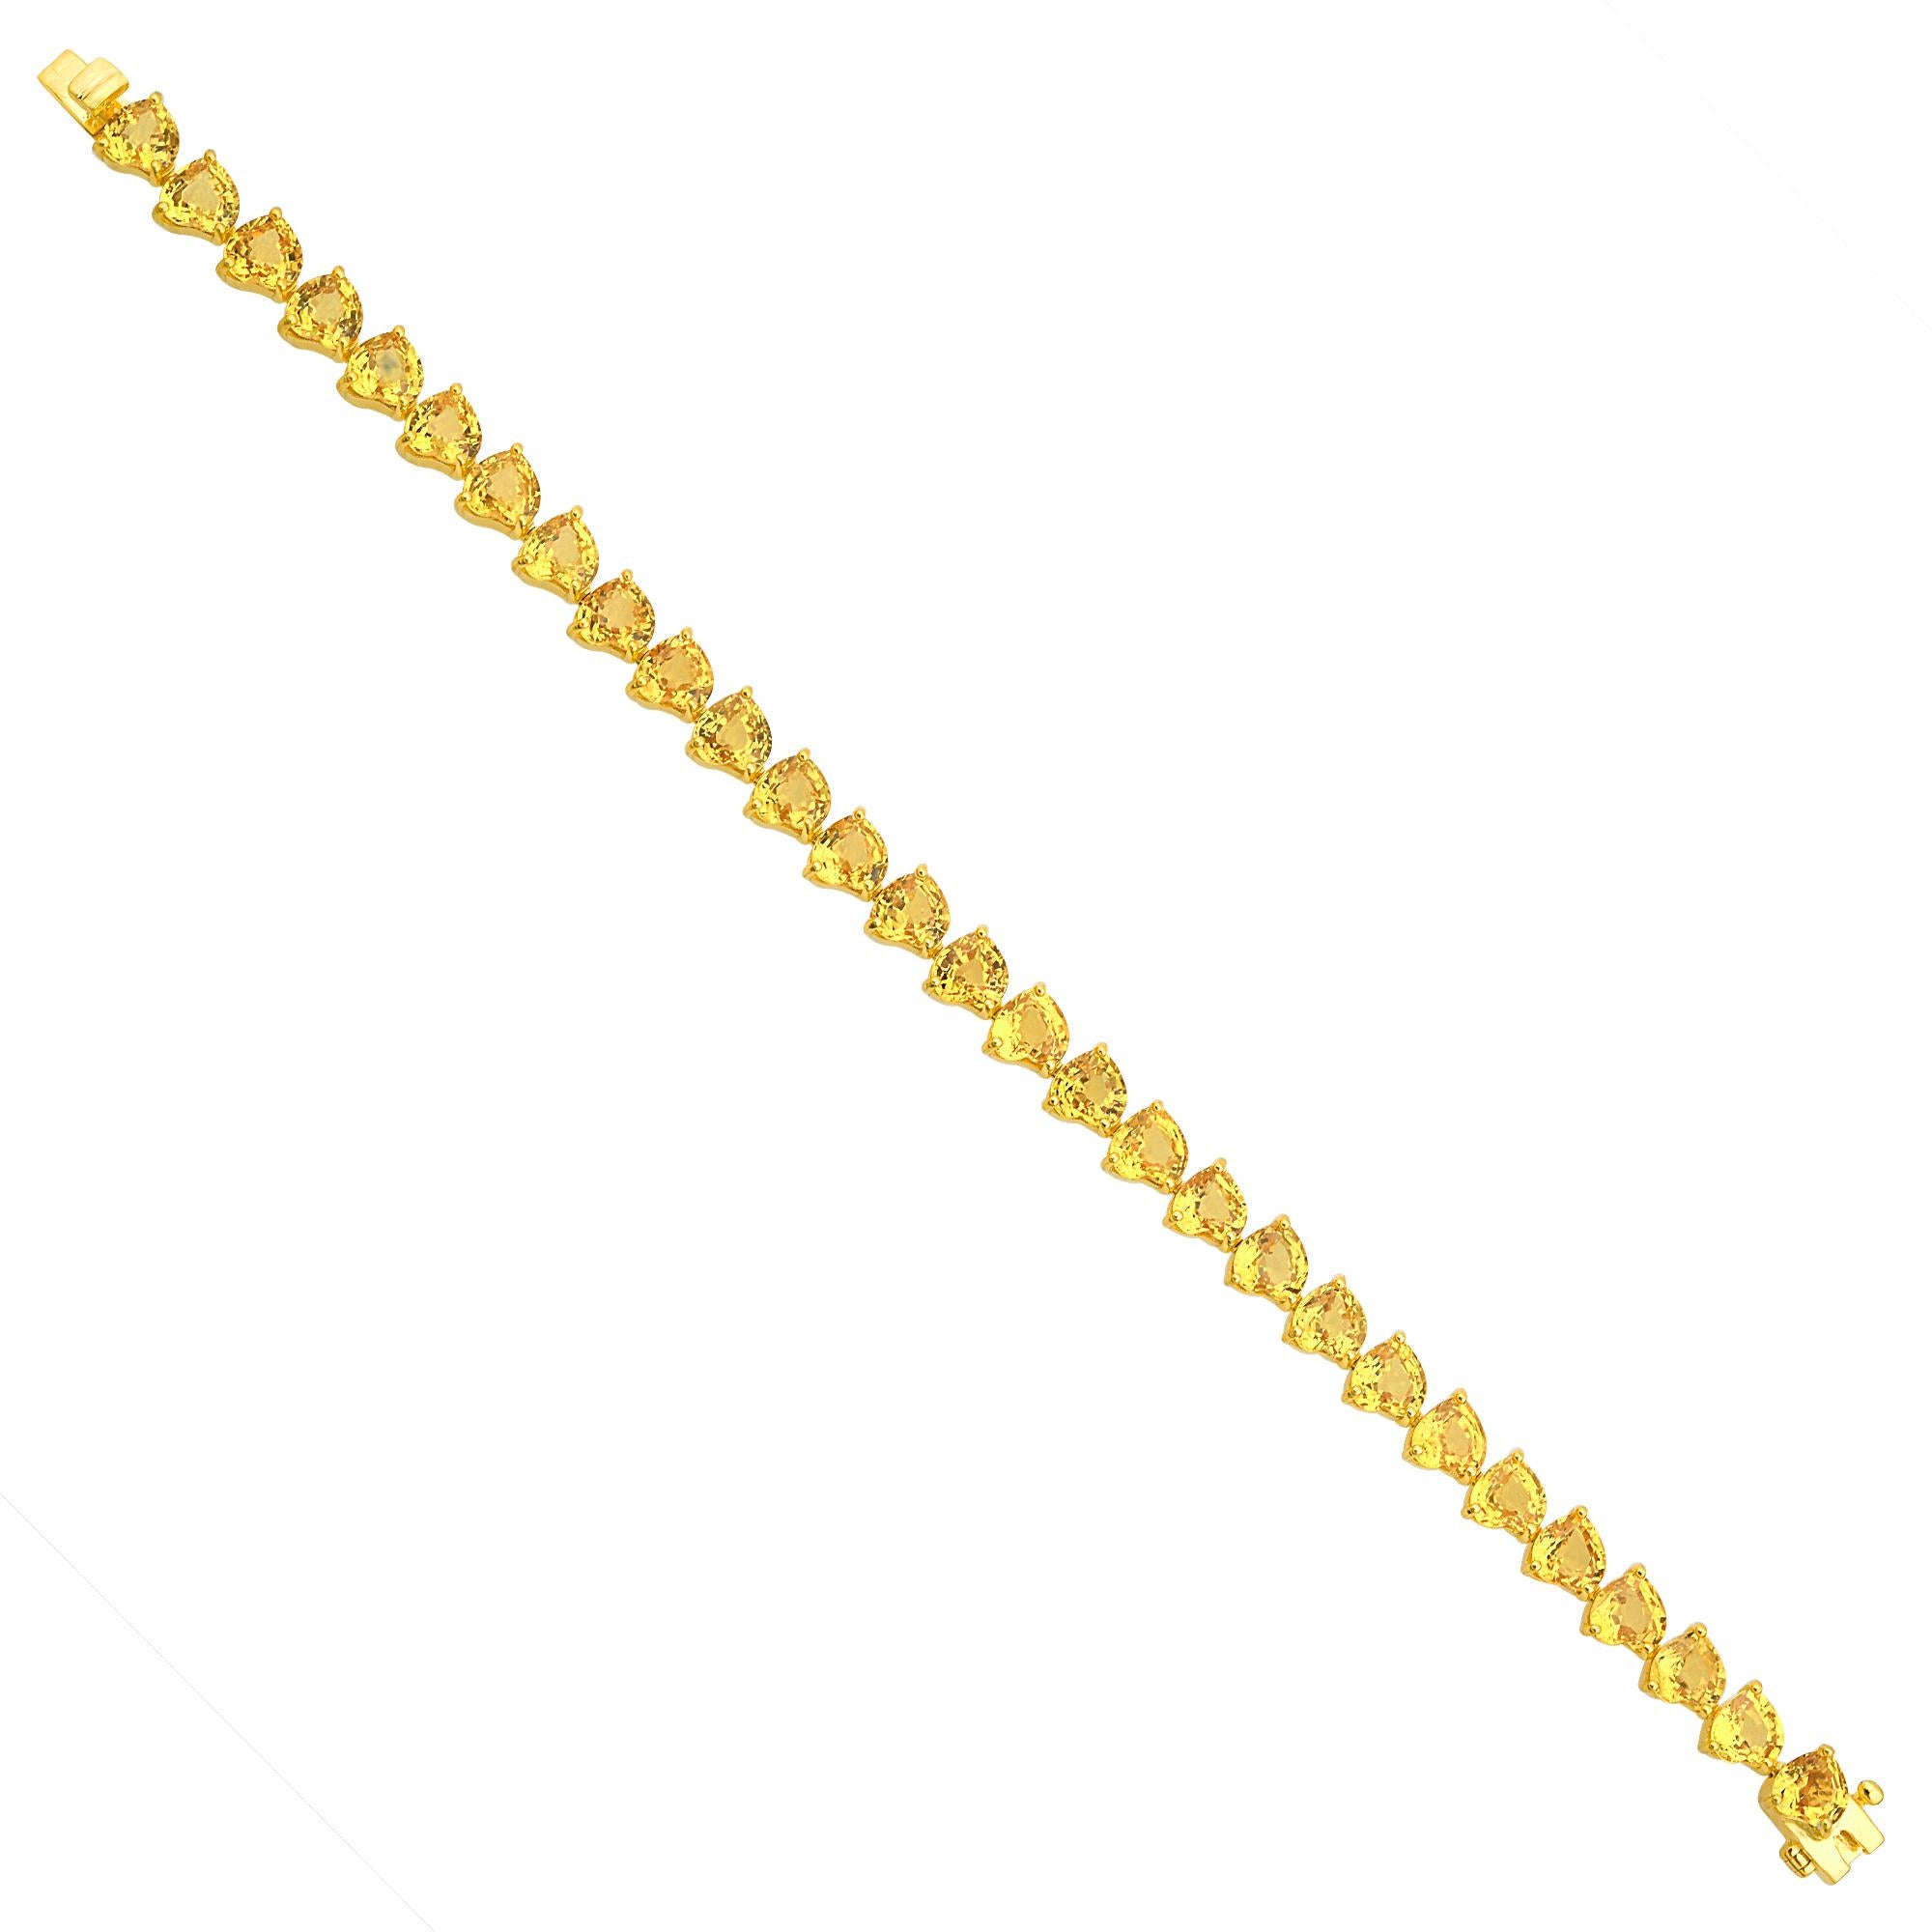 Item Code :- SEBR-41435
Gross Weight :- 14.91 gm
18k Yellow Gold Weight :- 11.32 gm
Yellow Sapphire Weight :- 17.95 carat
Bracelet Length :- 7 Inches Long

✦ Sizing
.....................
We can adjust most items to fit your sizing preferences. Most